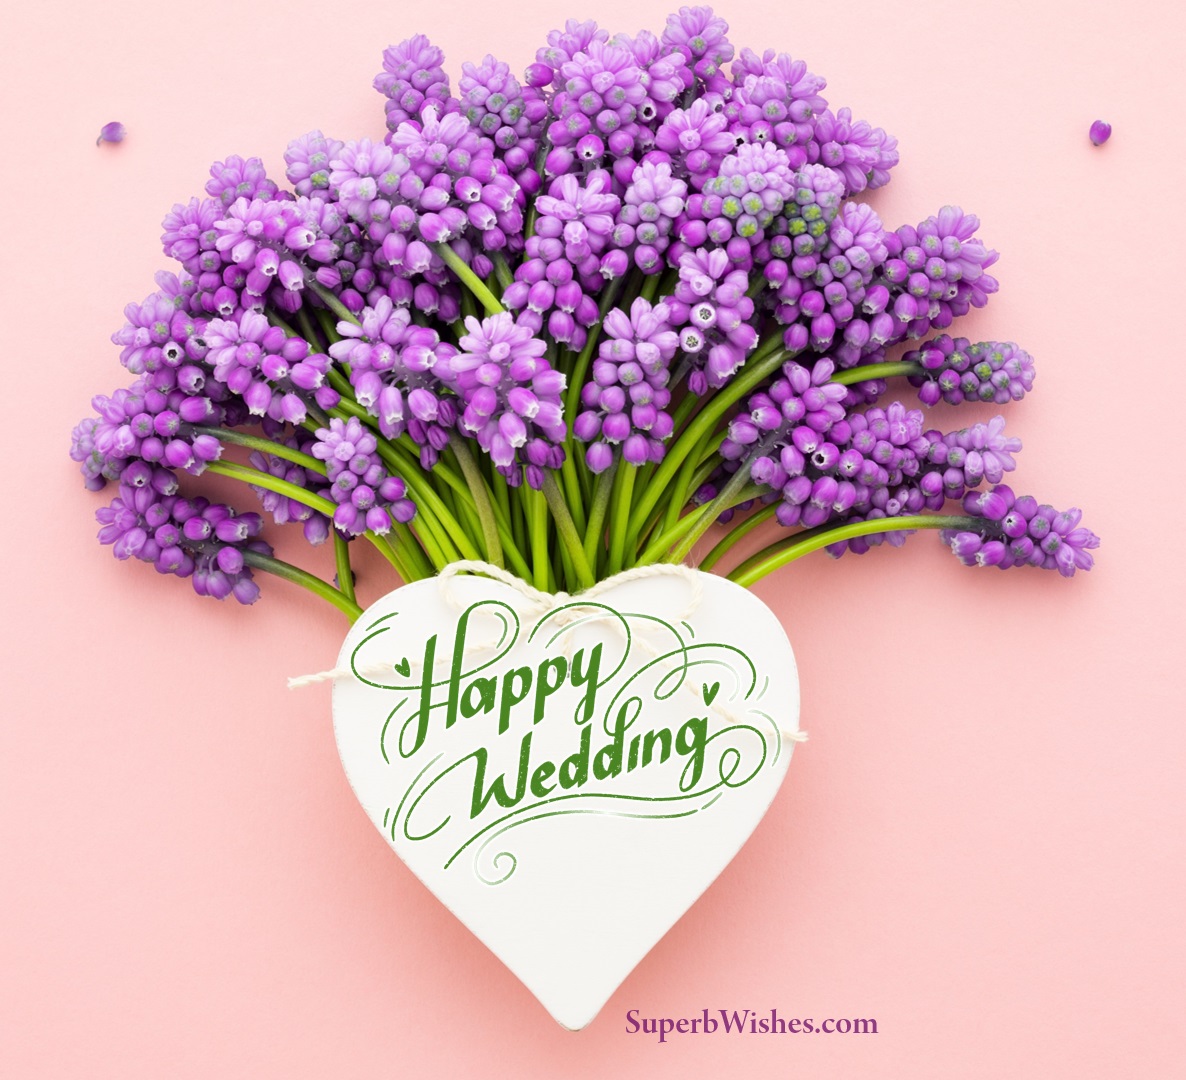 Happy Wedding Anniversary Image With Lavender Flowers | SuperbWishes